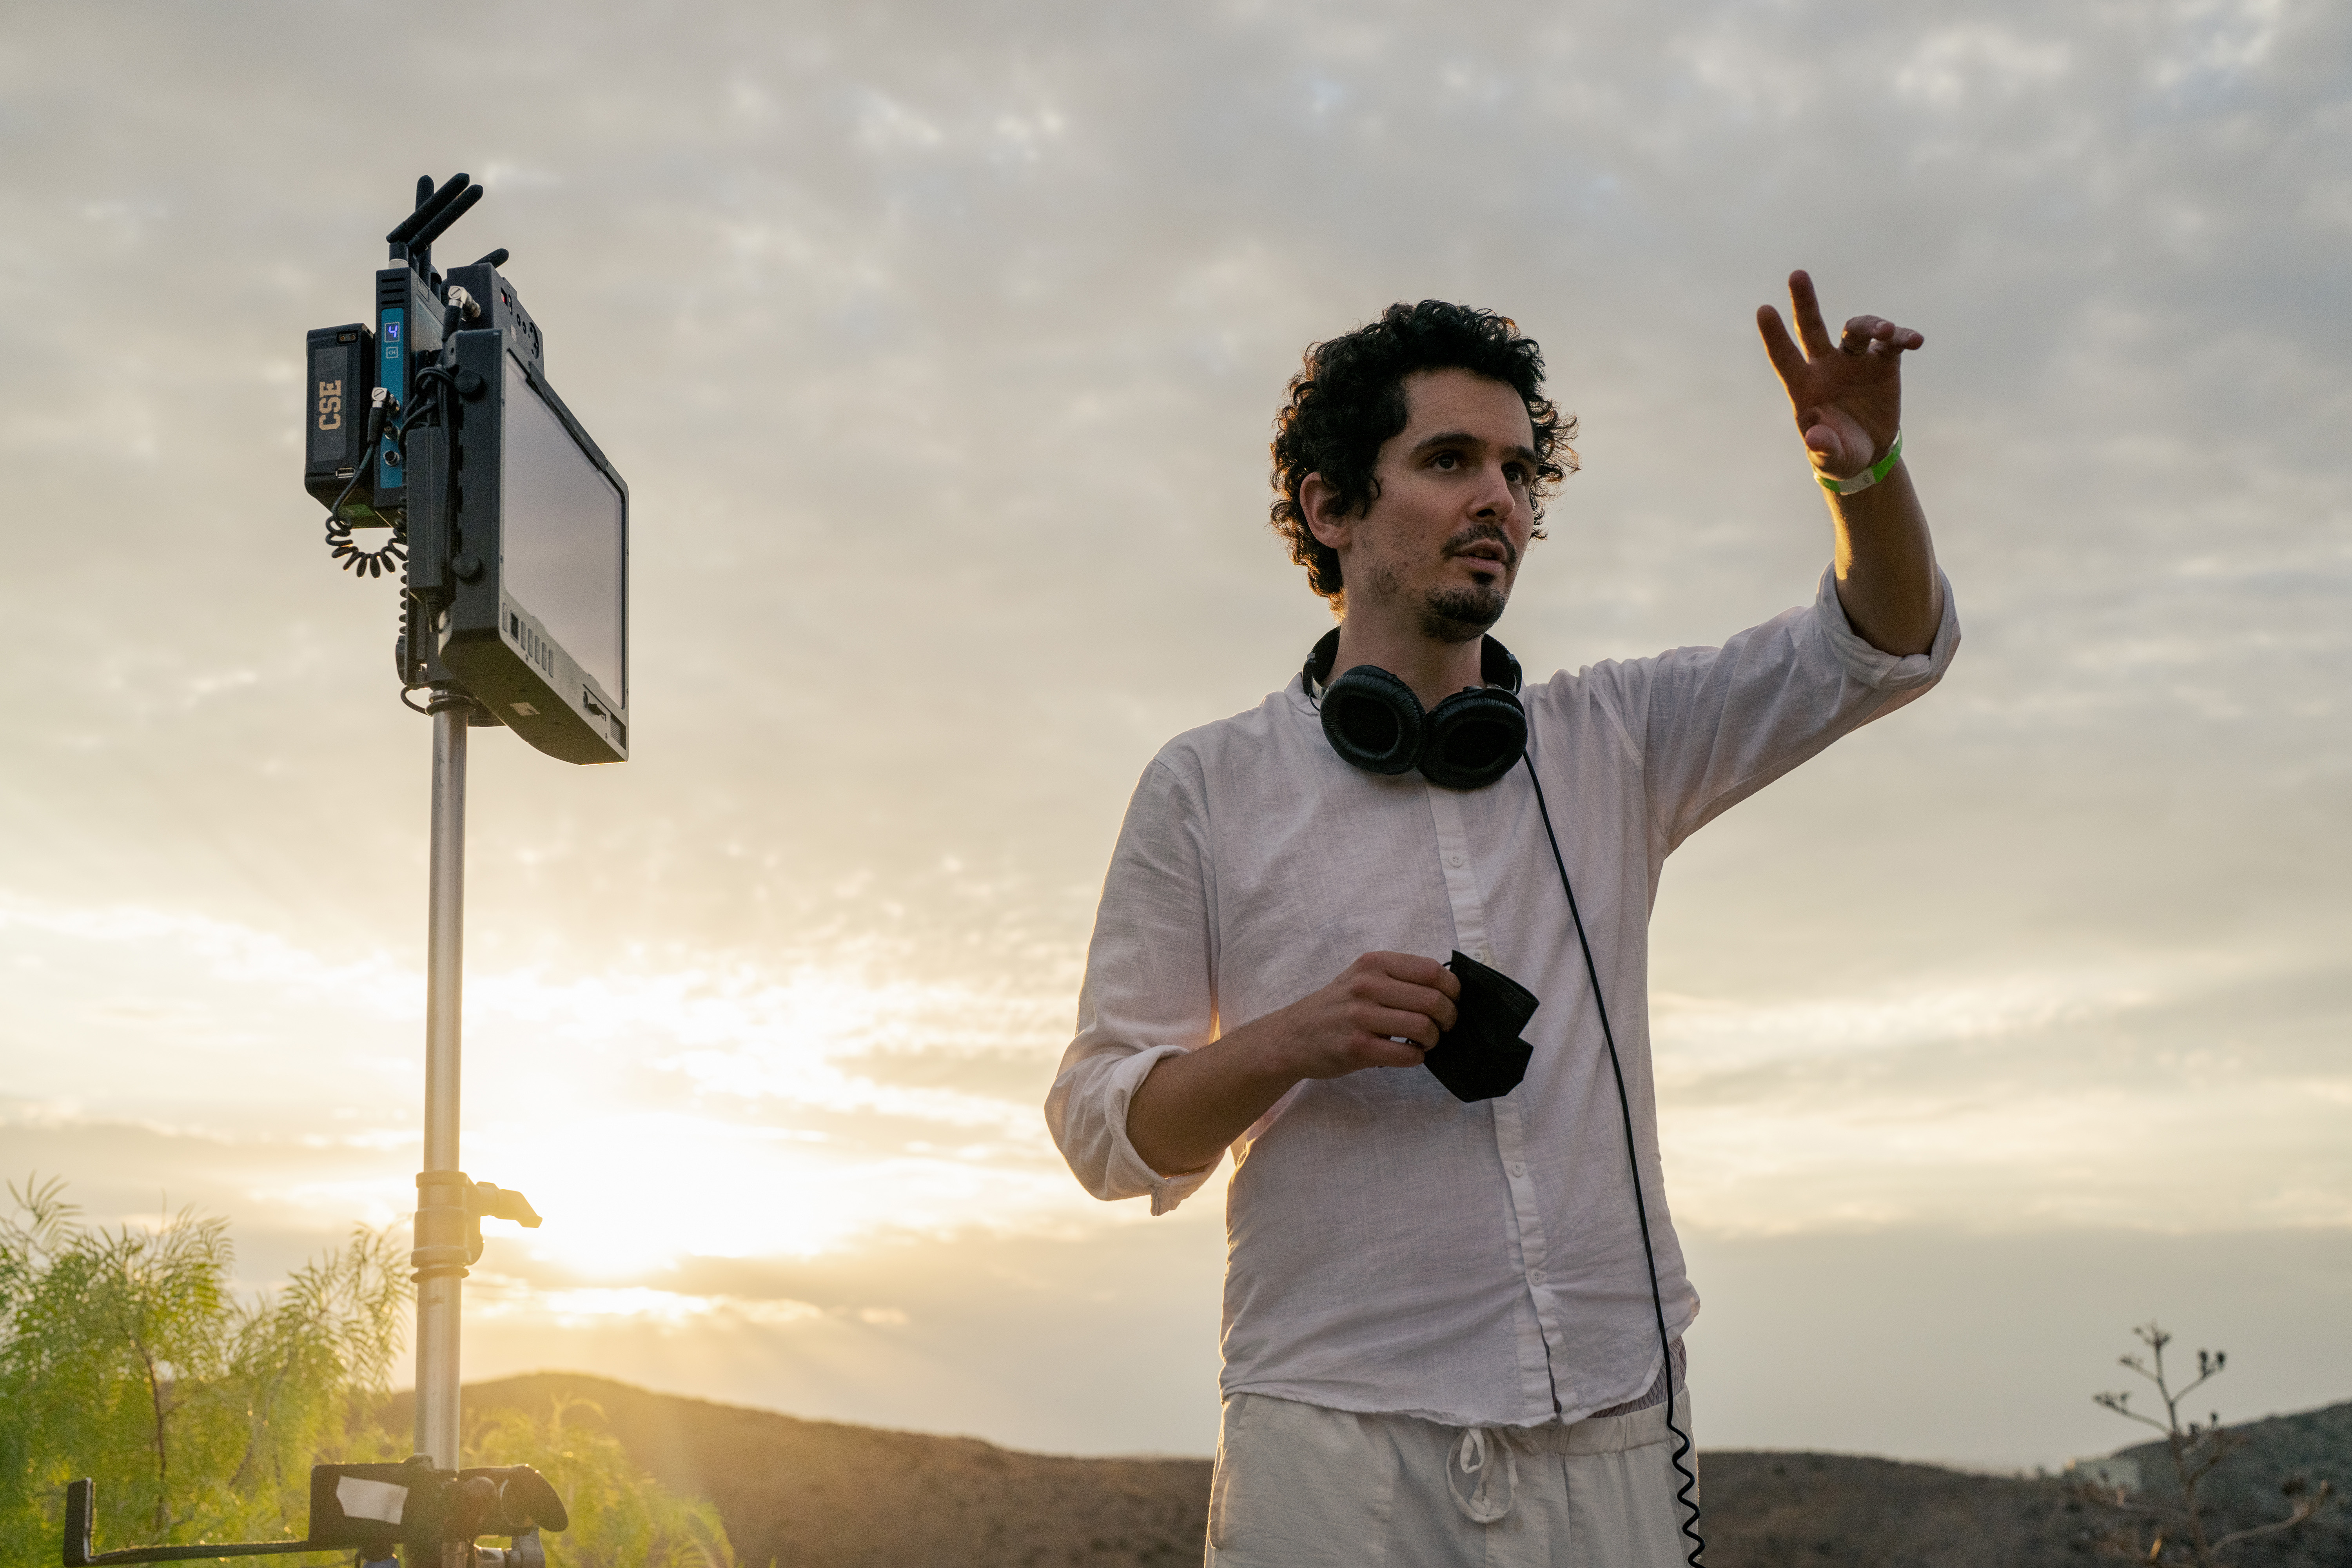 Director Damien Chazelle on the set of Babylon from Paramount Pictures.